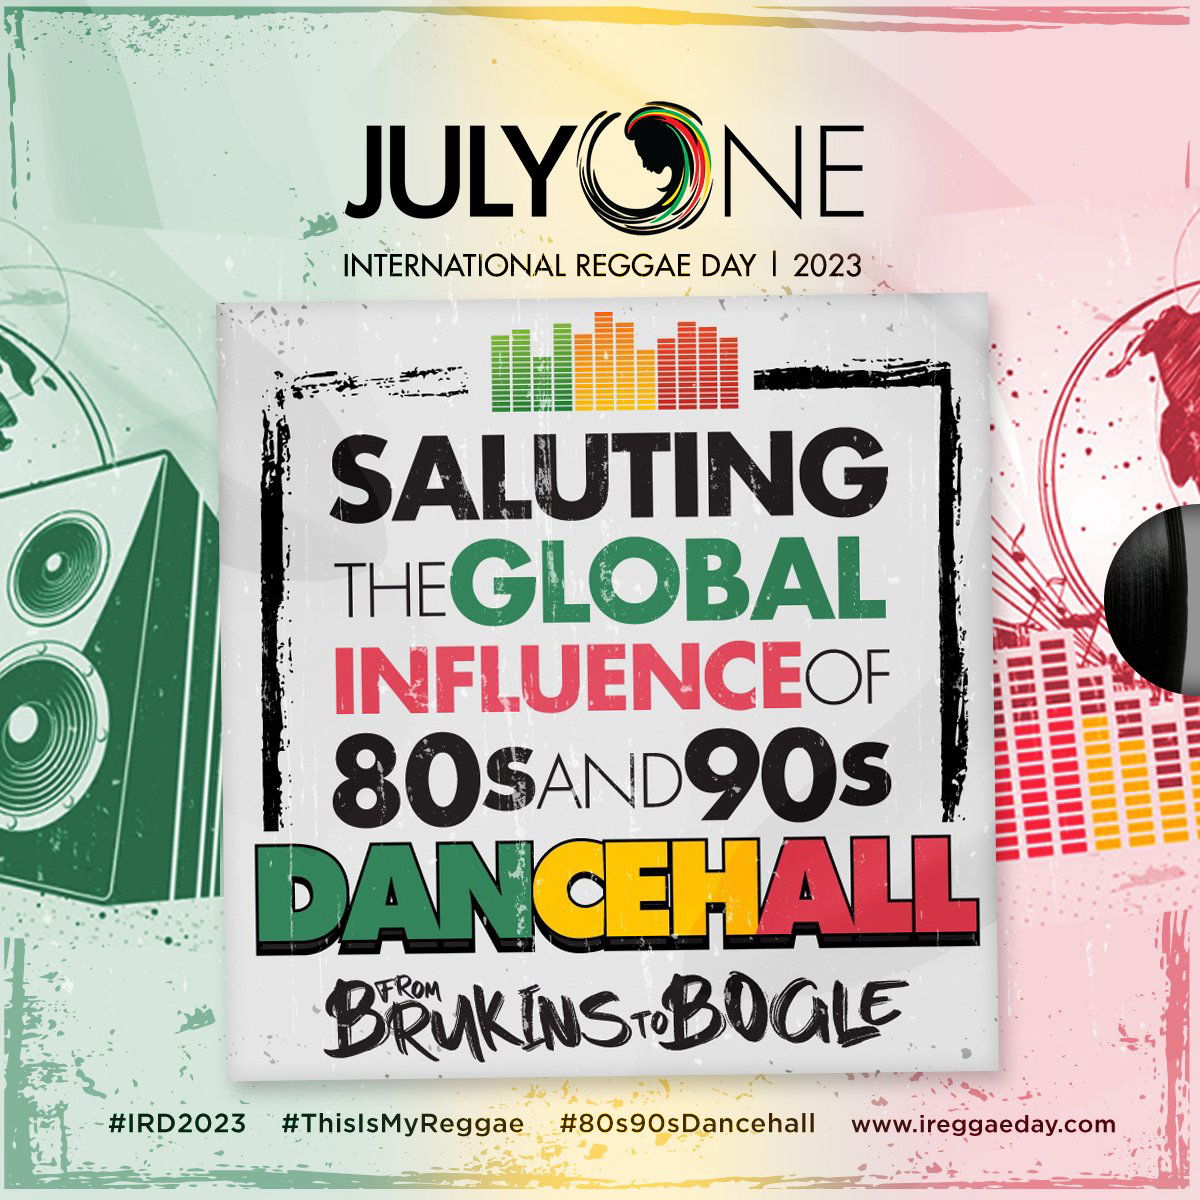 International Reggae Day 2023 will Celebrate Global Influence of 80s and 90s Dancehall